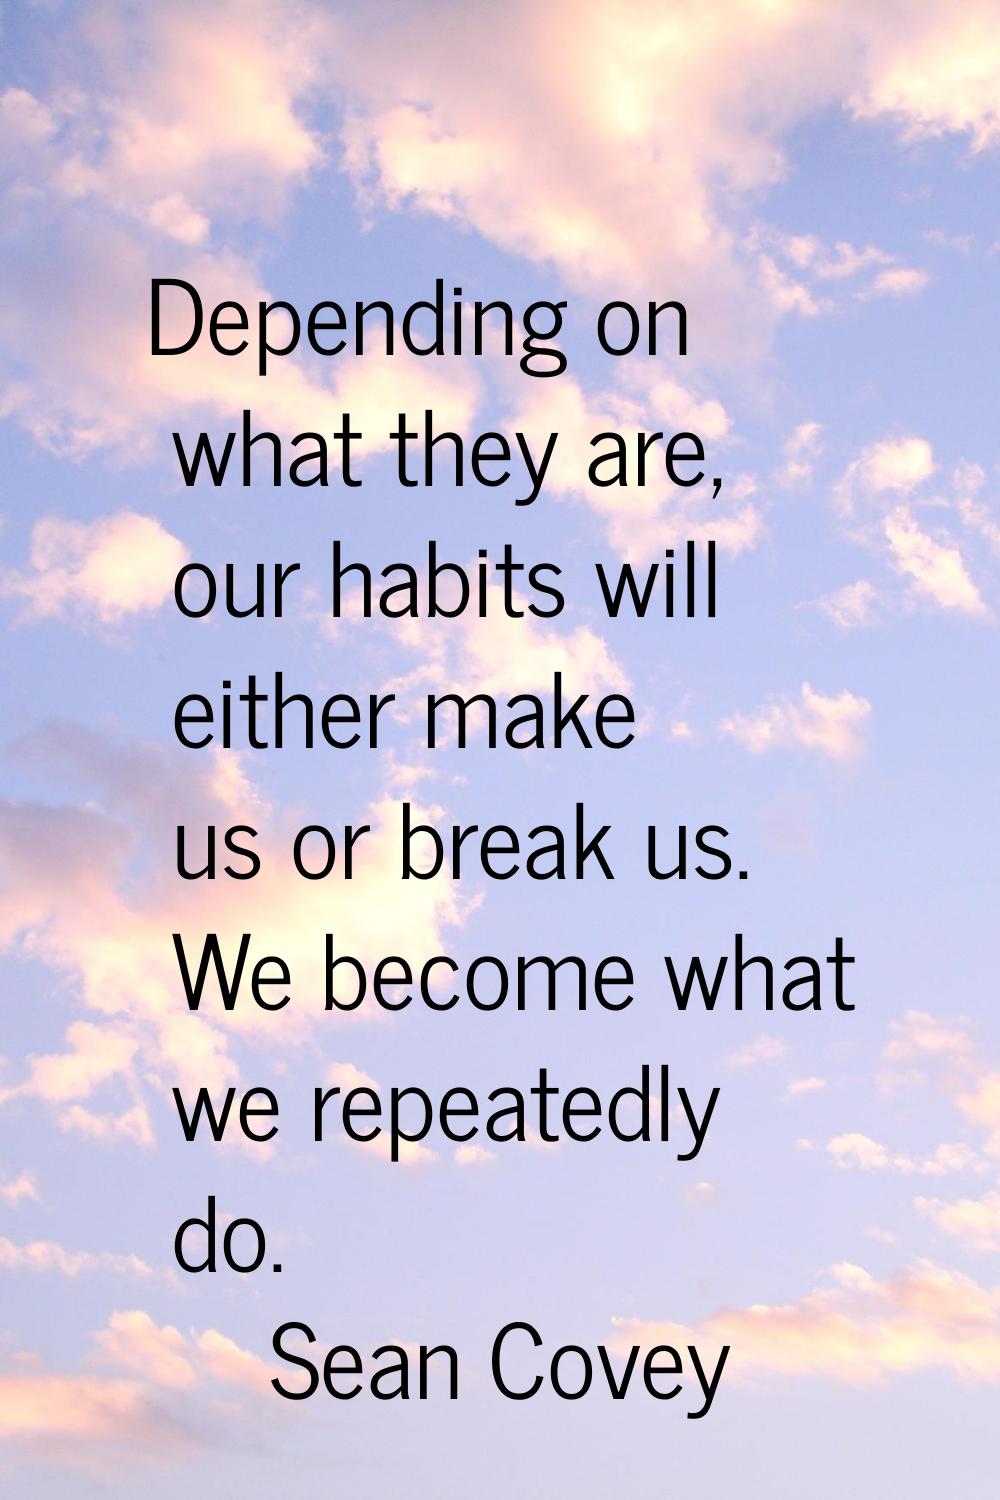 Depending on what they are, our habits will either make us or break us. We become what we repeatedl